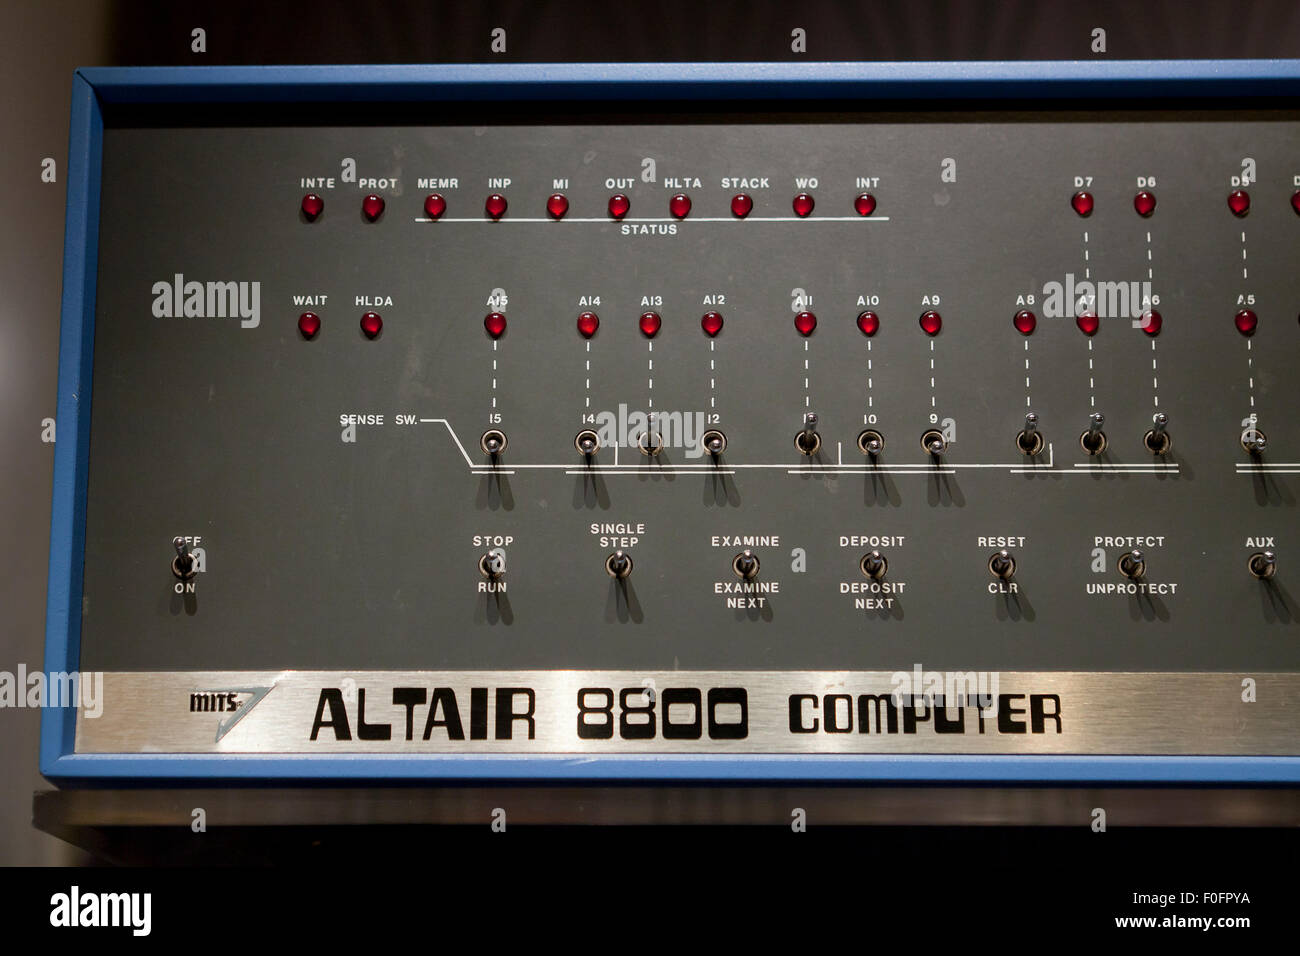 MITS Altair 8800 computer - USA Stock Photo